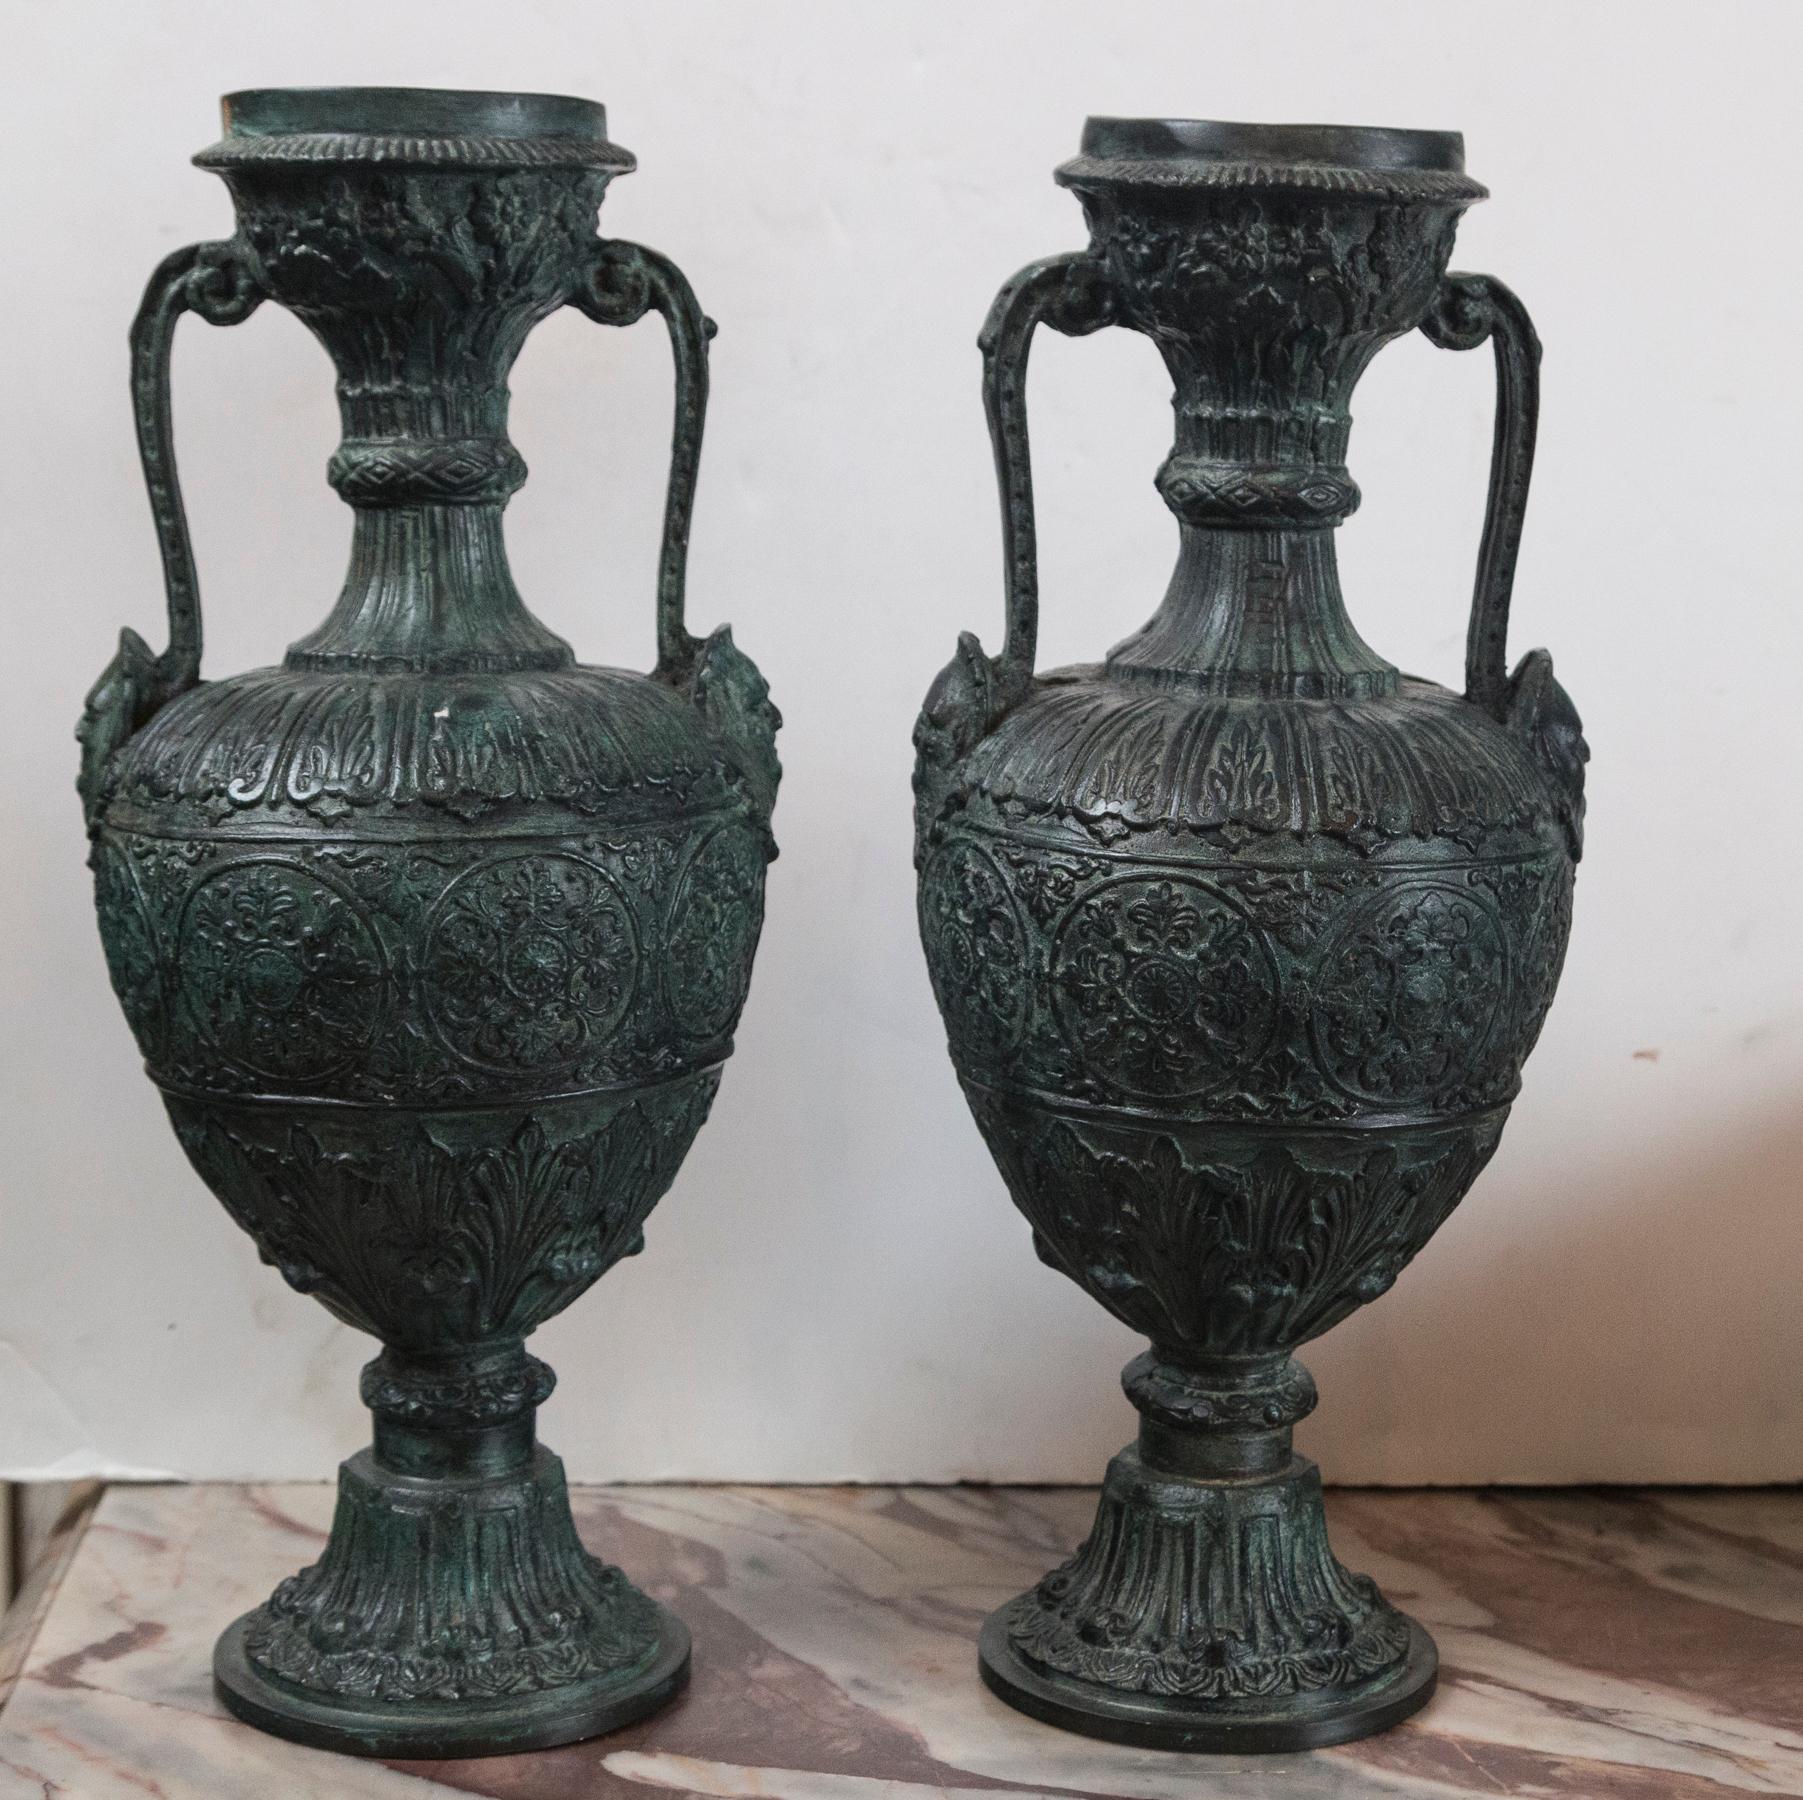 Double handled urns with green/black patina. The base having a 4 inch diameter
The undersides with a Maitland Smith label.
The handles ending at the body with mask decoration. Decorated all around.